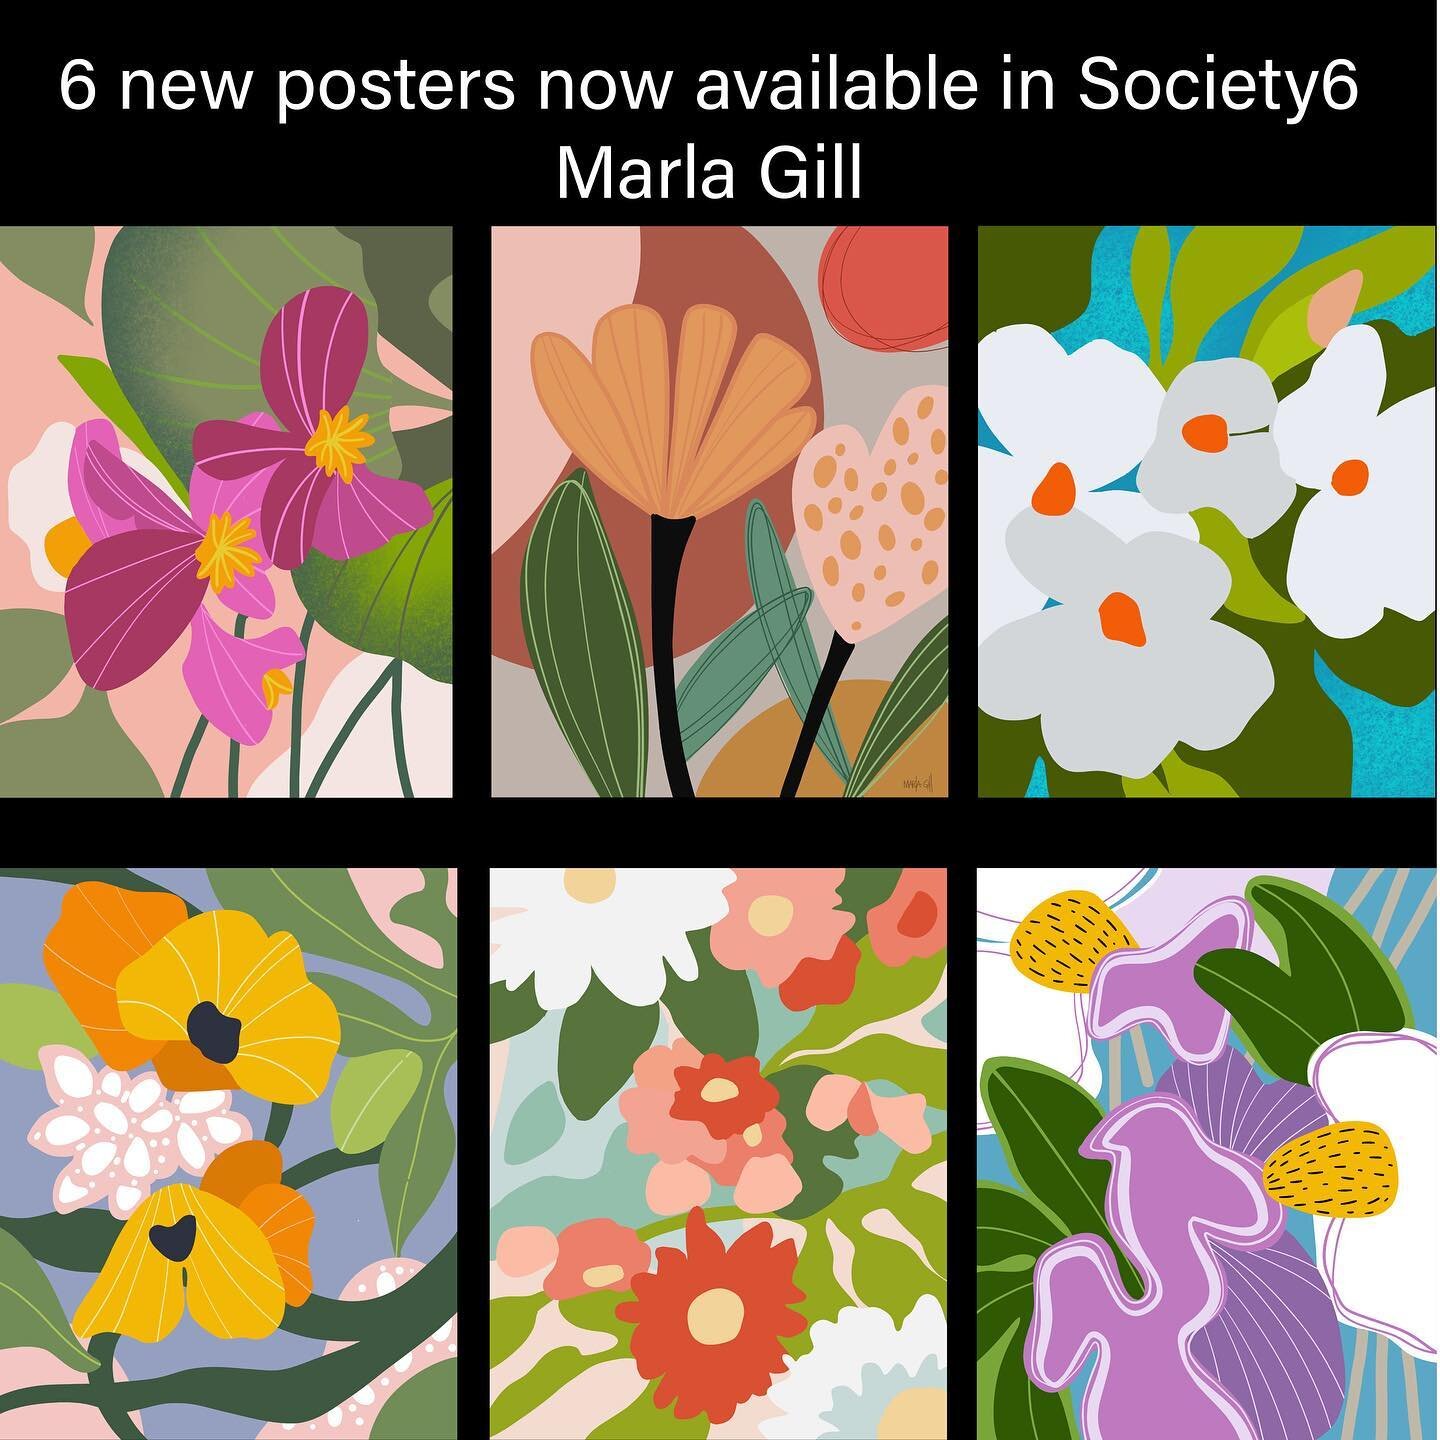 These designs will also be available as prints in my Etsy store early next week. #posters #poster #wallart #prints #printsforsale #bohostyle #bohodecor #vectorart